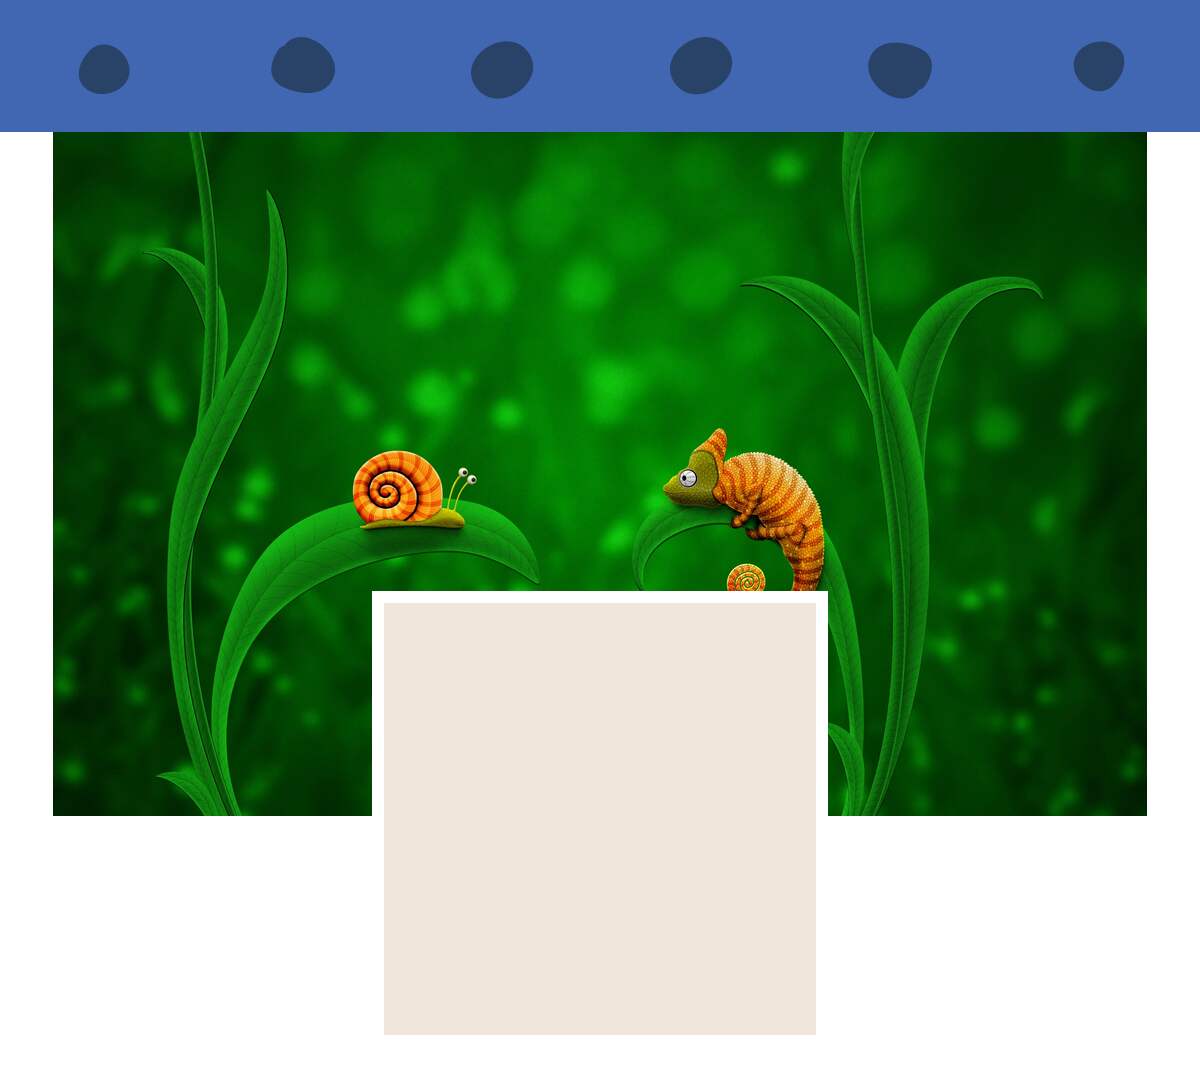 Snail and Chameleon: preview